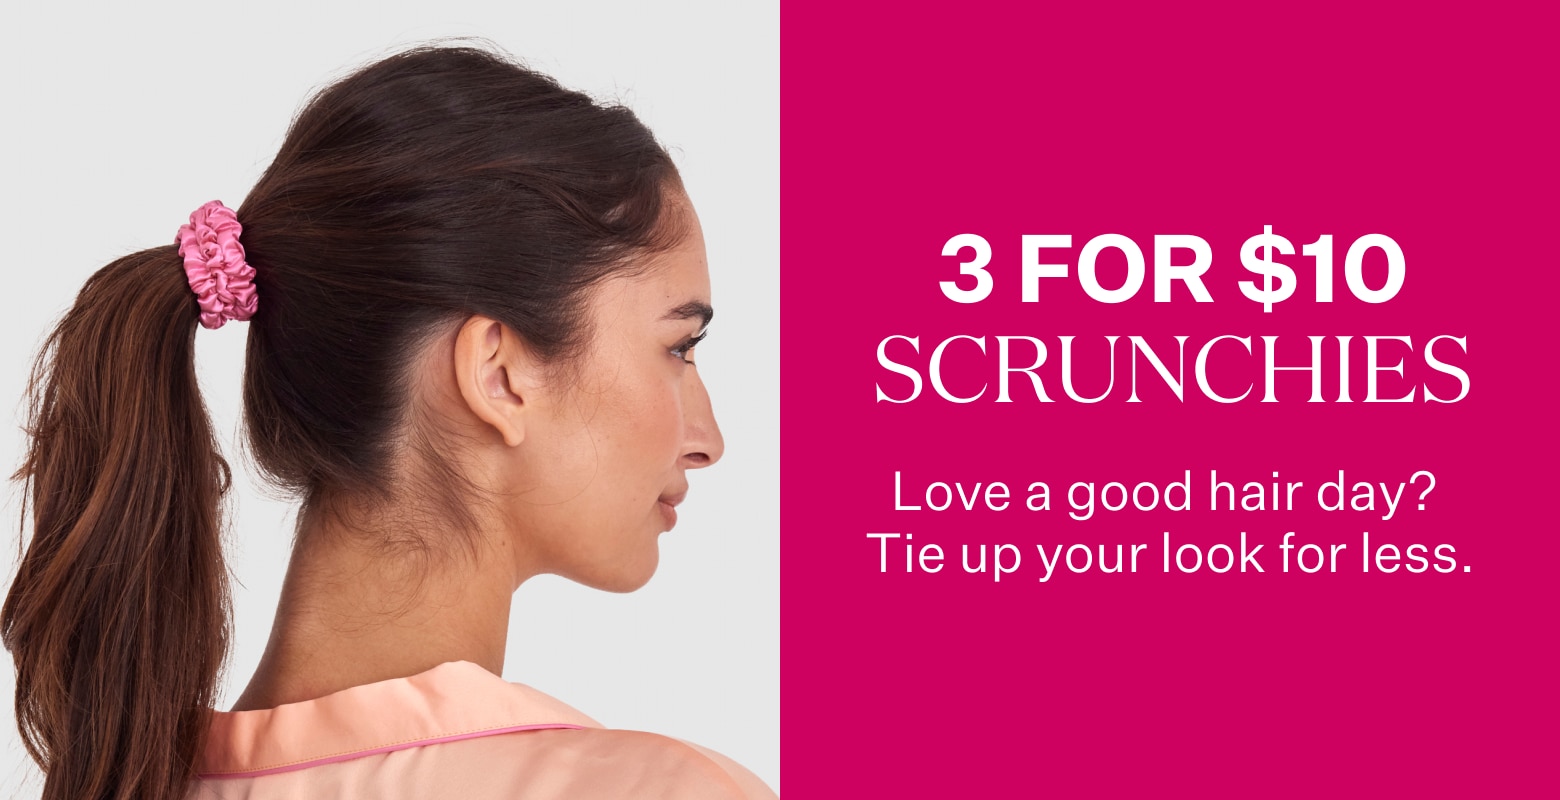 3 For $10 Scrunchies. Love a good hair day? Tie up your look for less.